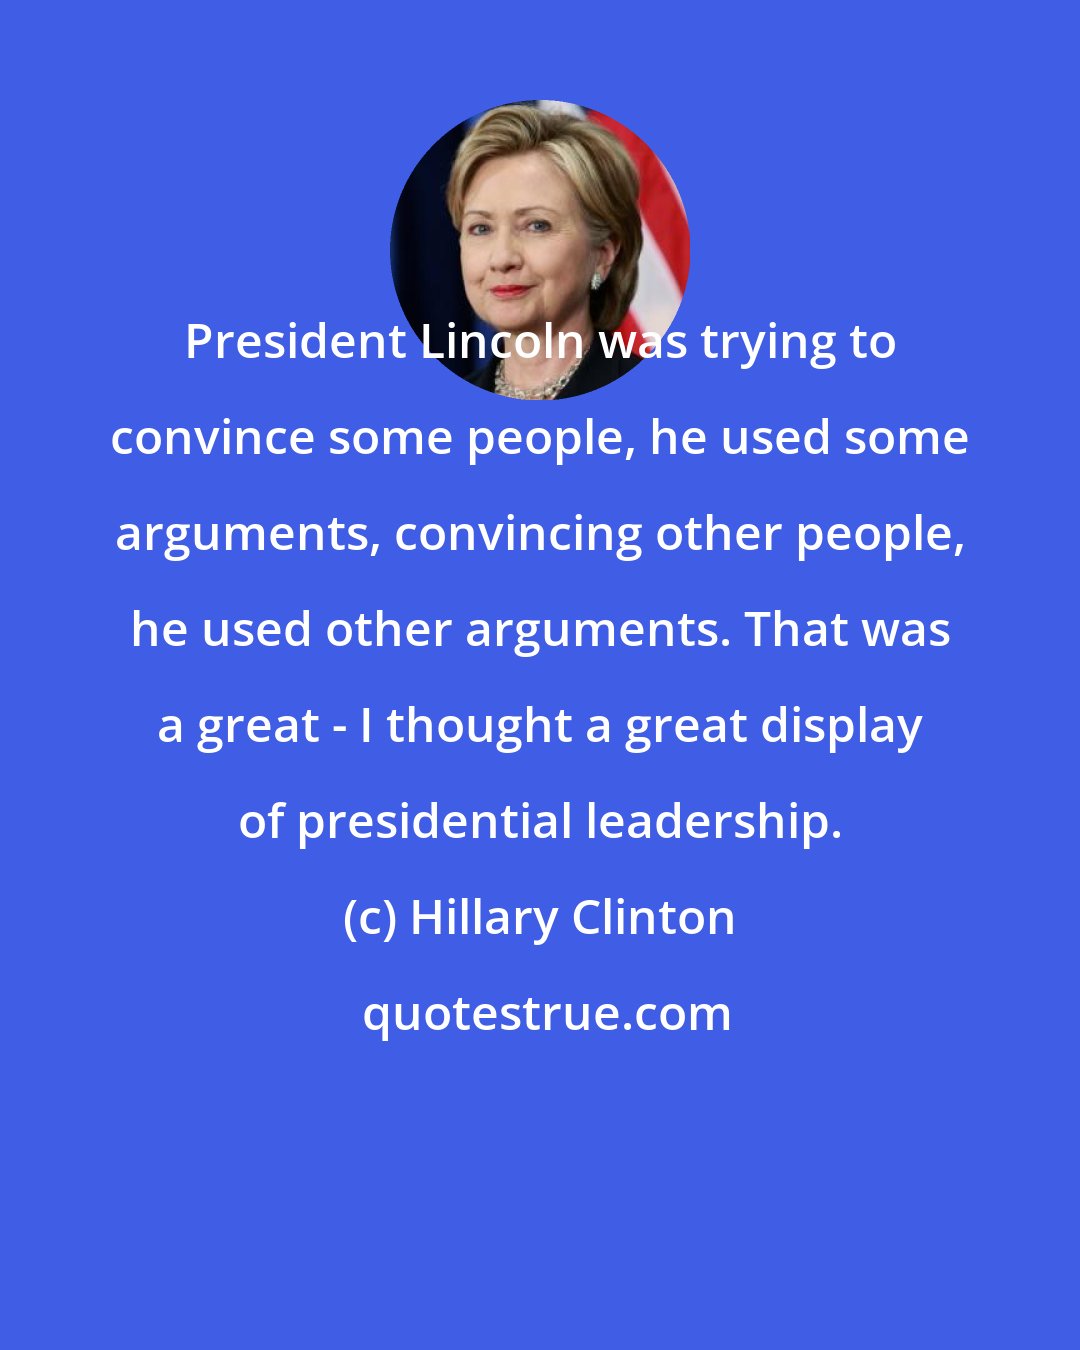 Hillary Clinton: President Lincoln was trying to convince some people, he used some arguments, convincing other people, he used other arguments. That was a great - I thought a great display of presidential leadership.